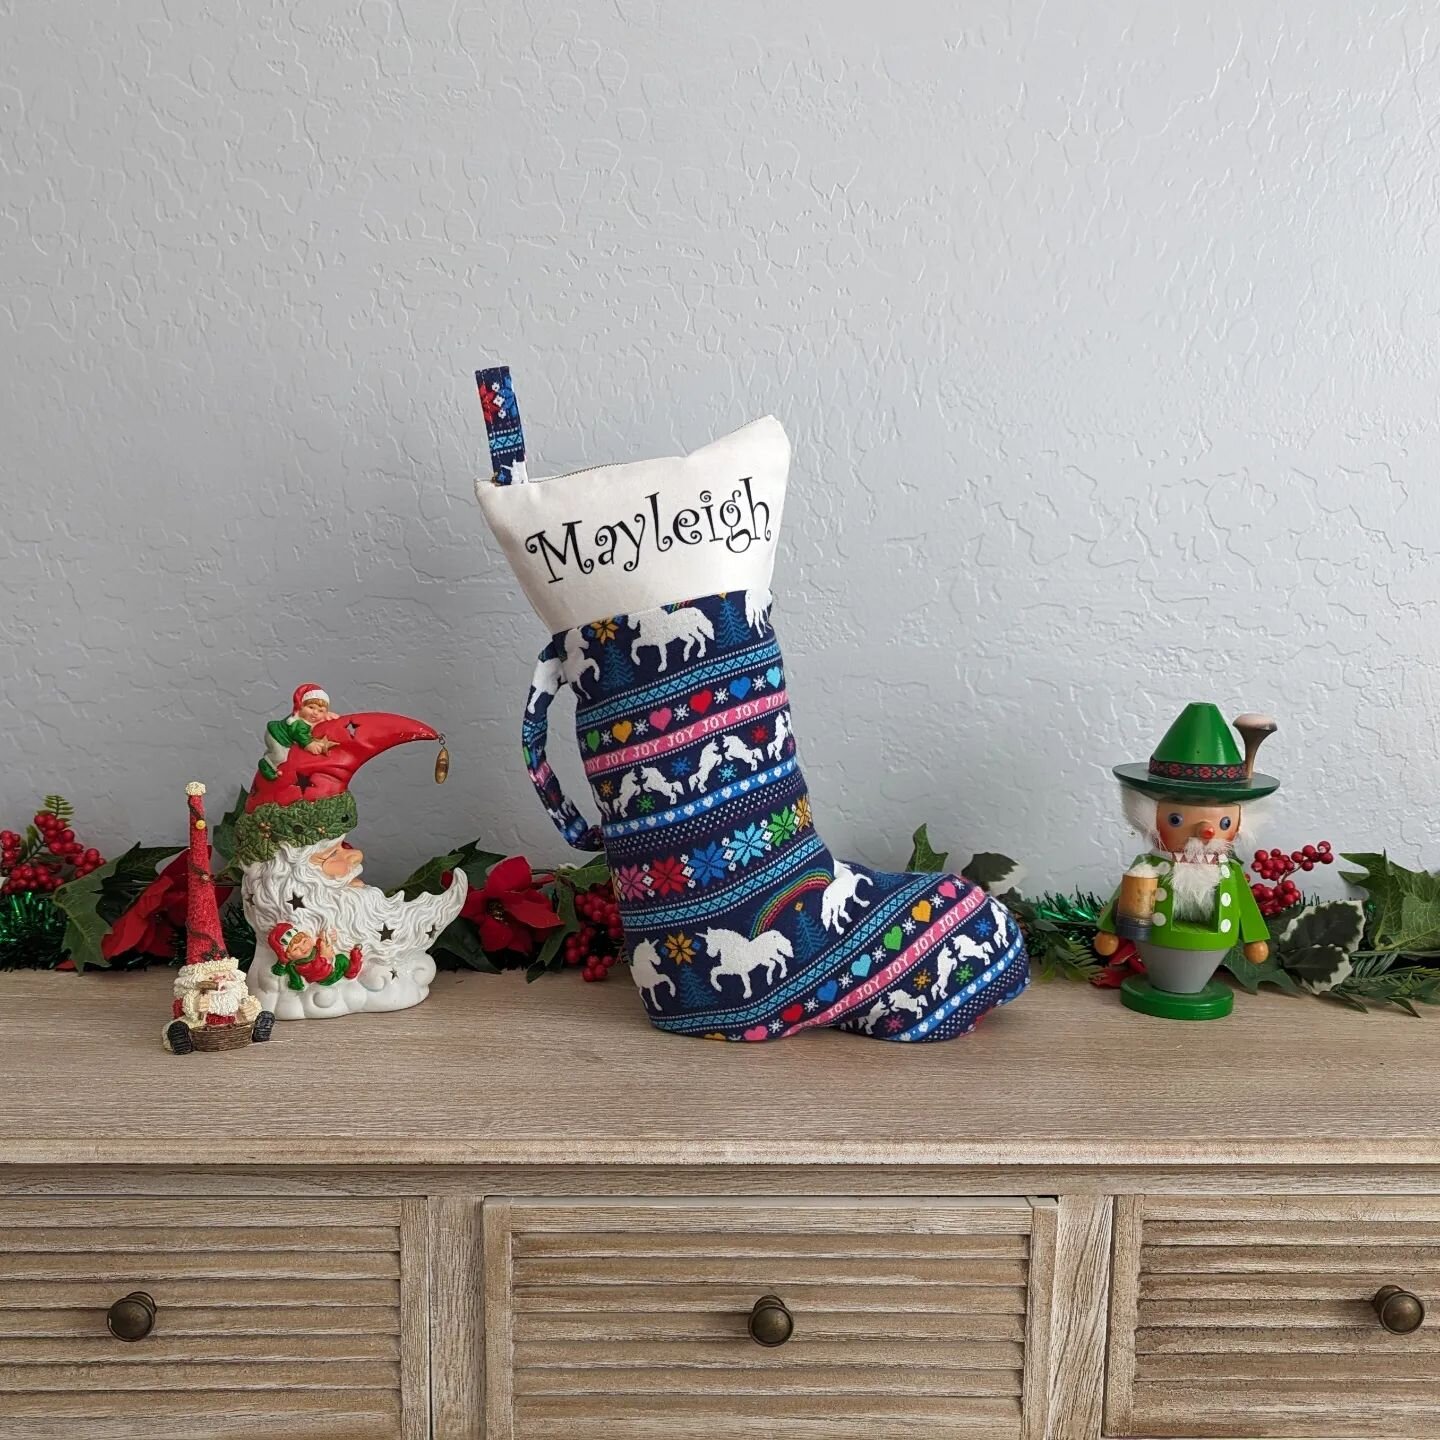 I love seeing all of the different names that come in for custom orders. Definitely one of my favorite things about making stockings is personalizing them! 
#shopsmall #christmas #family #gilbert #gilbertaz #unzipchristmastogether